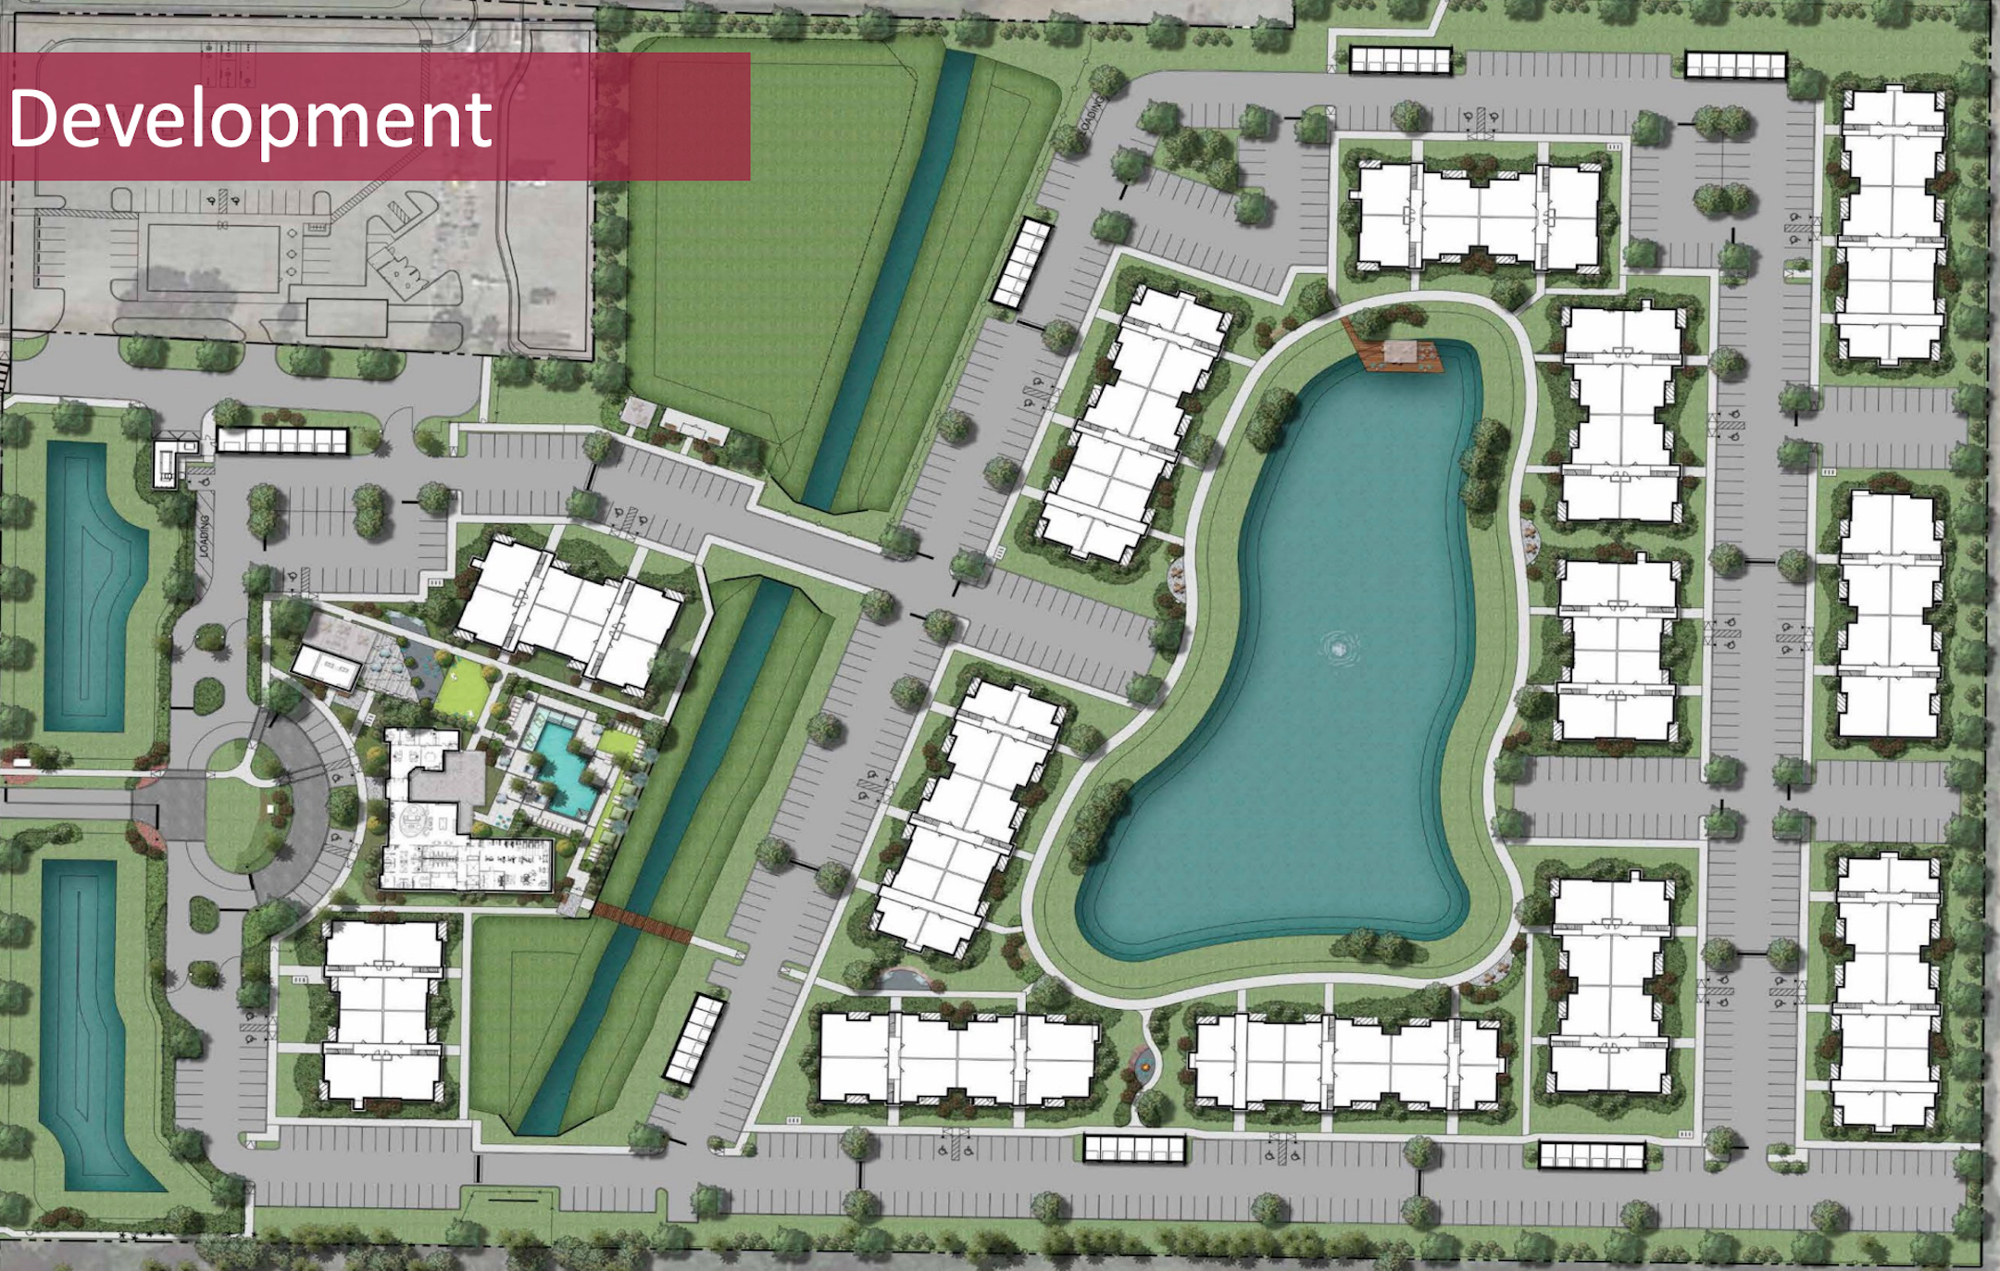 The approved site plan for Aventon Sarasota places the majority of the residential buildings to the right beneath SRQ's noise contour. (Courtesy image)